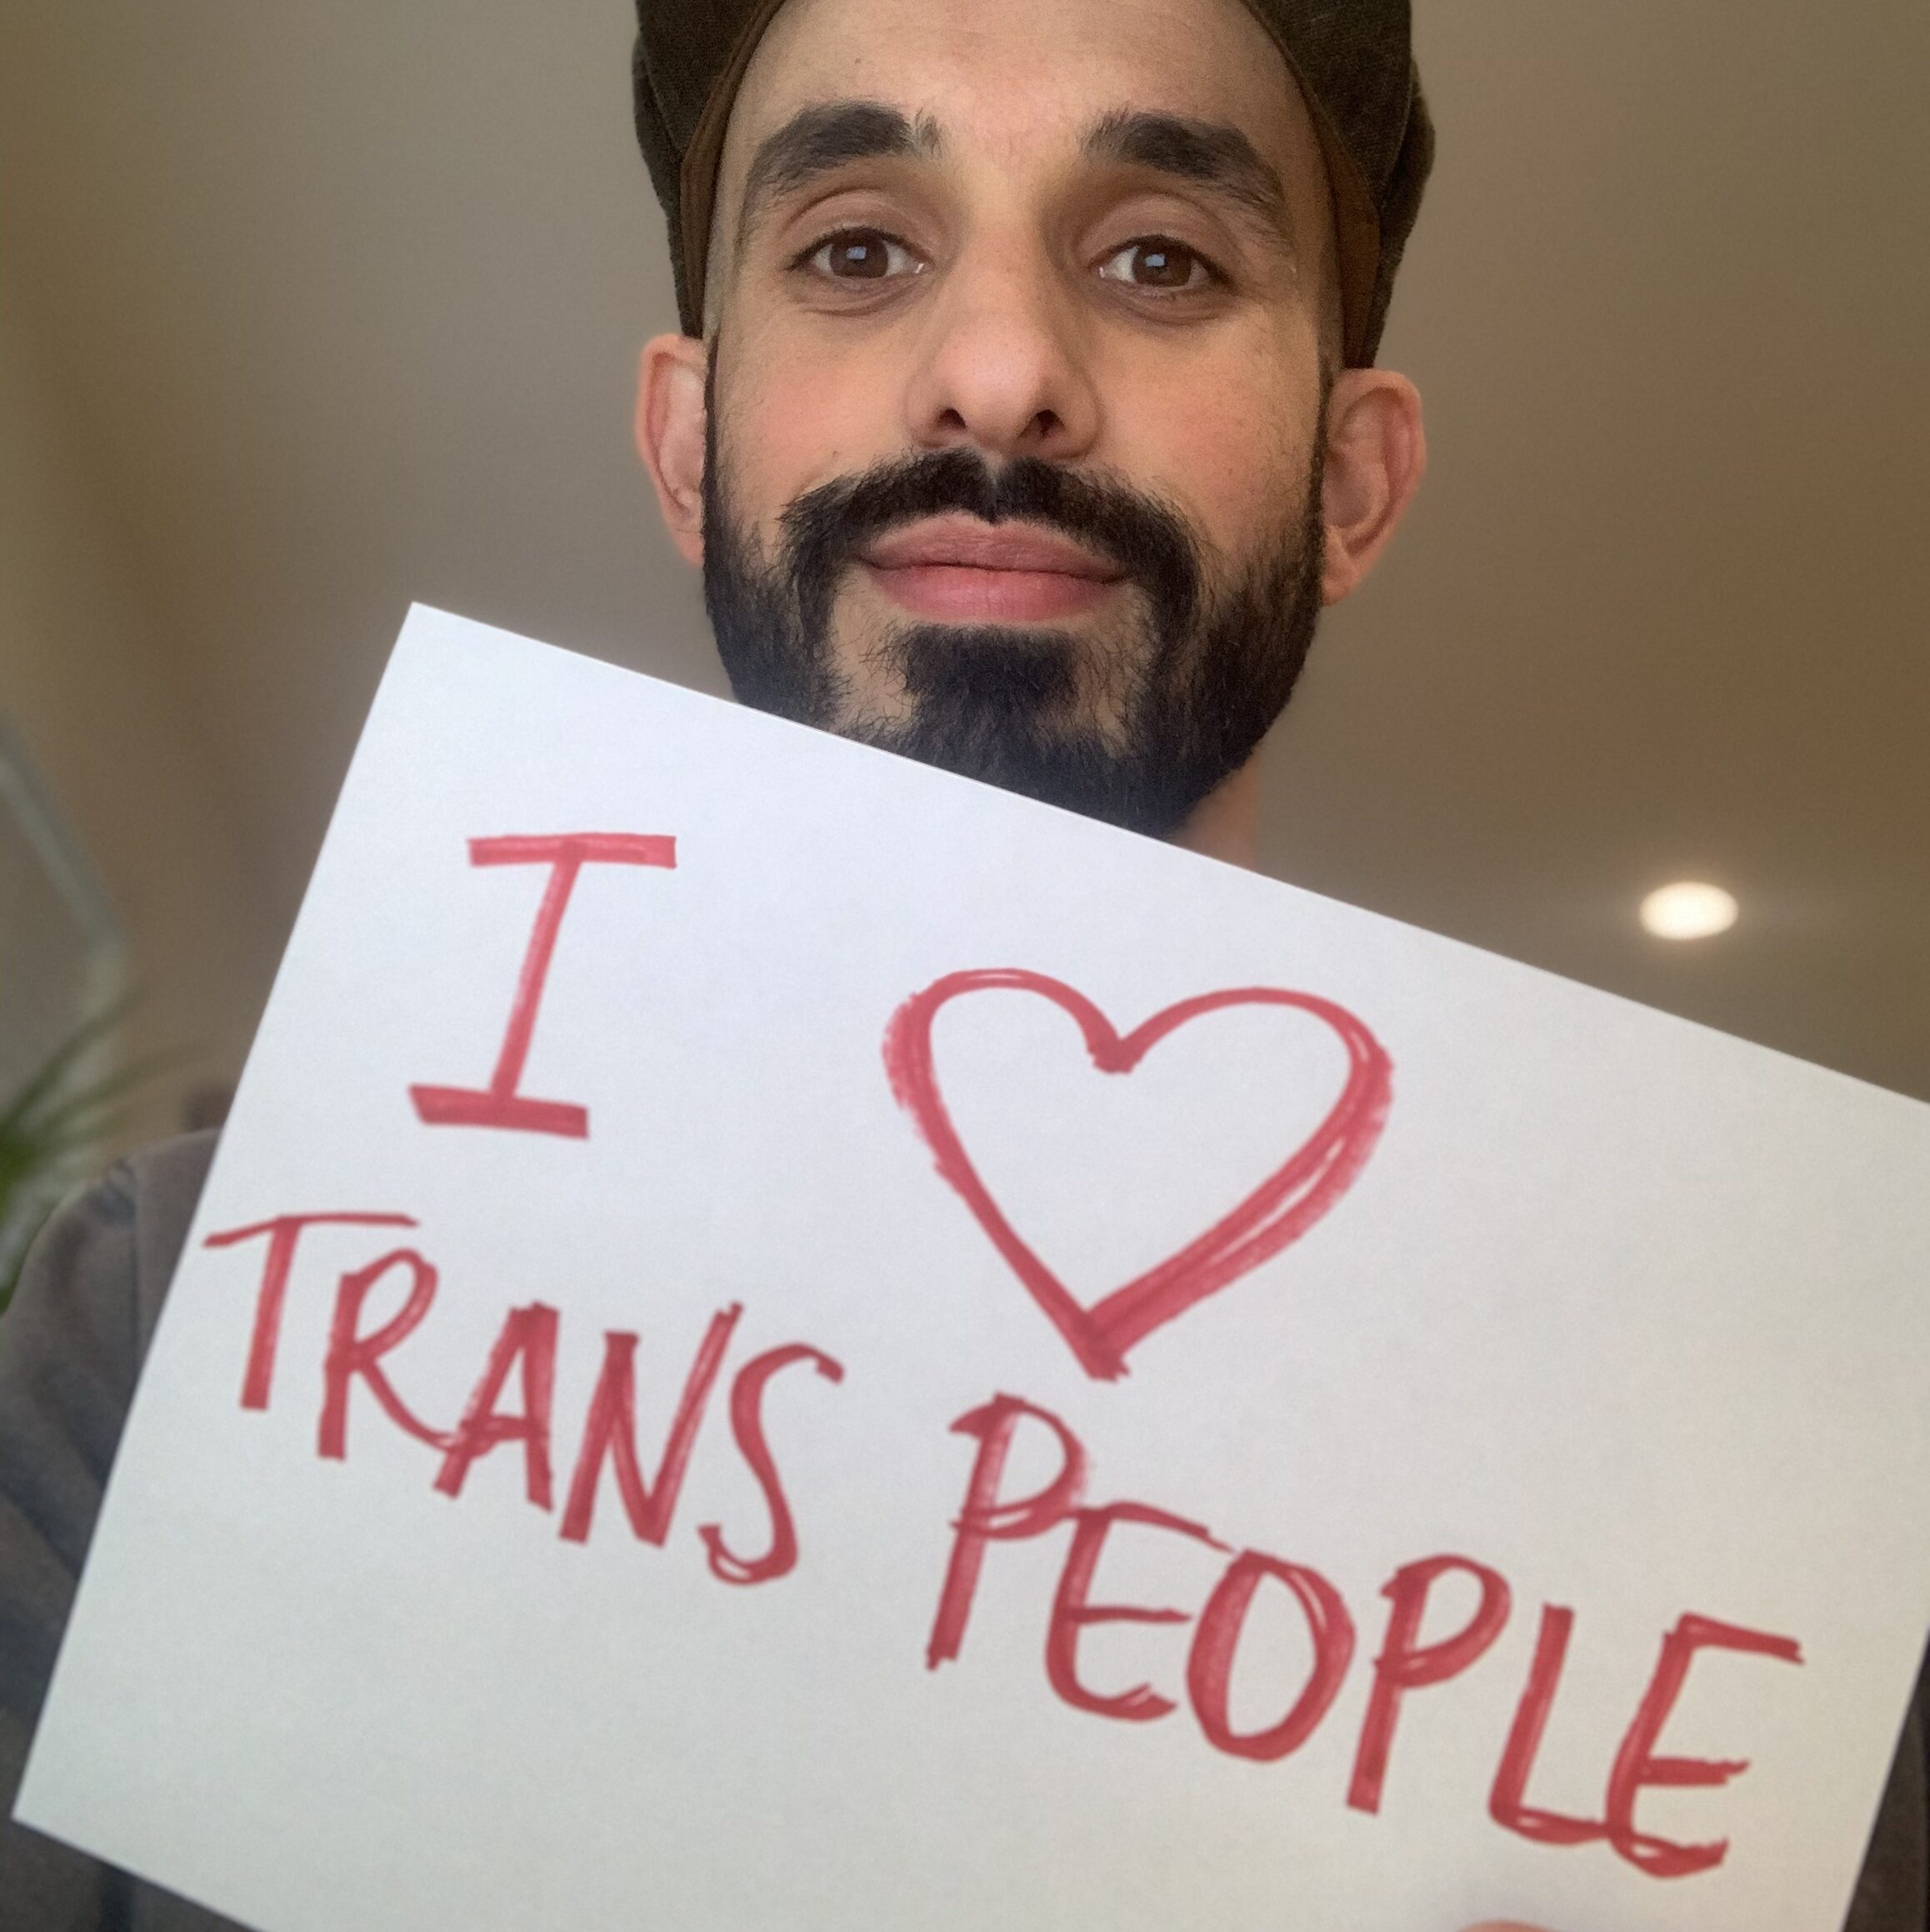 Eric Garcia, a light-skinned Latinx person with a thick black mustache and beard holds a handwritten sign that says "I (drawn heart) Trans People”